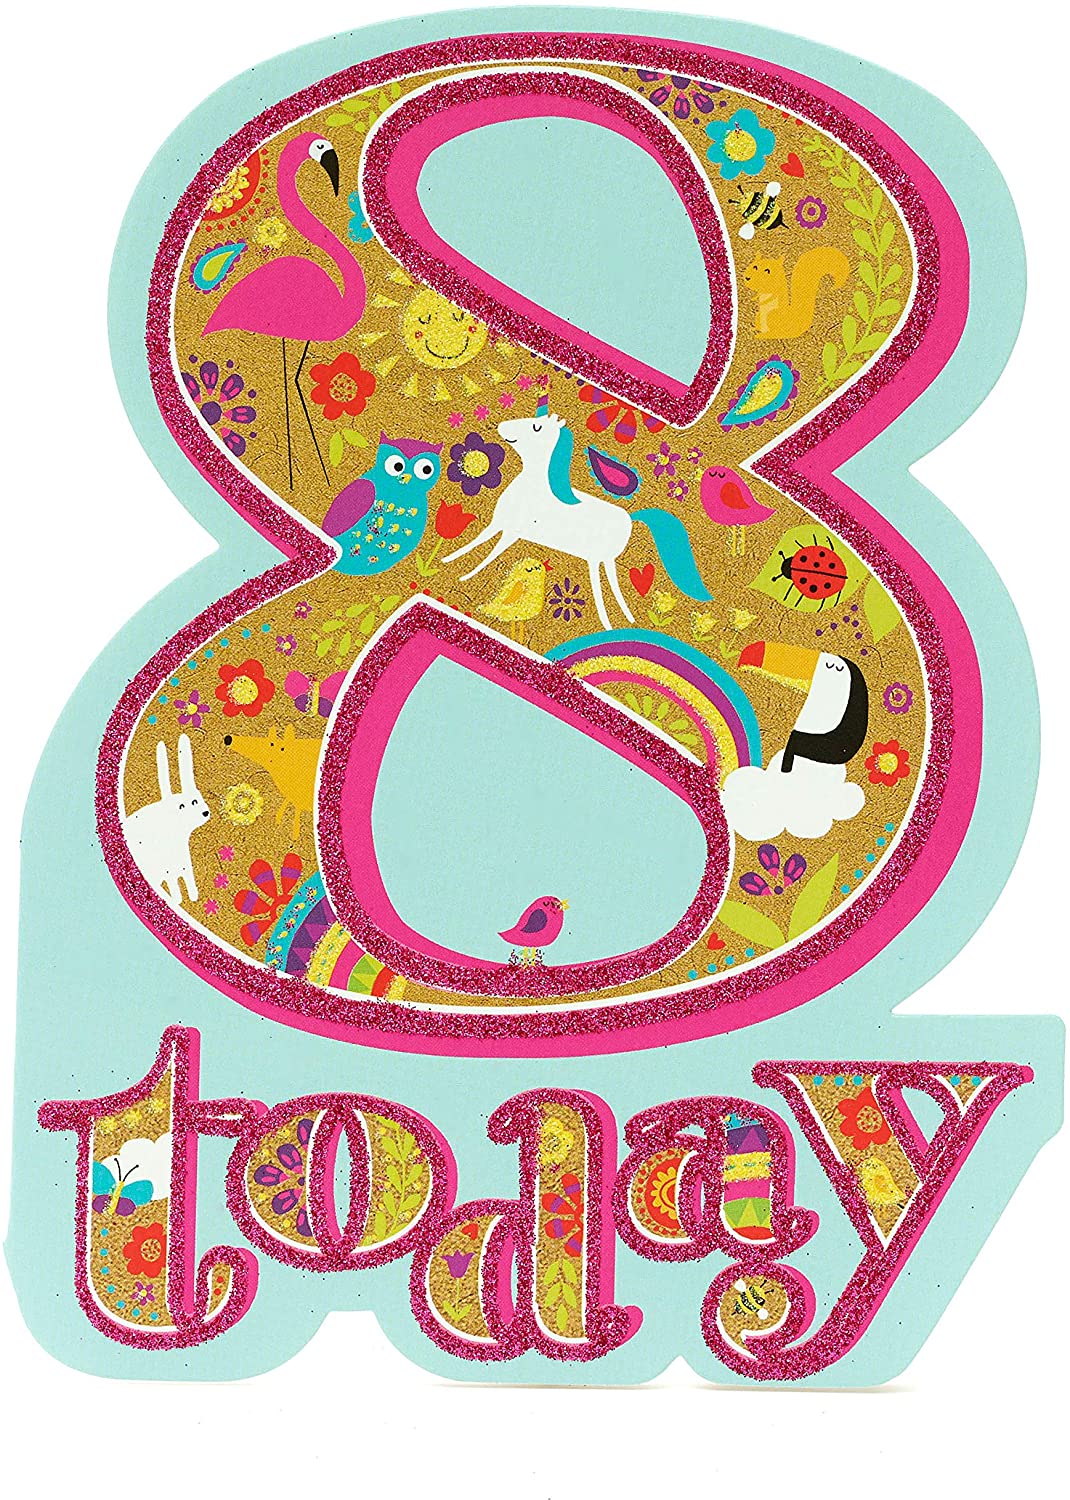 8th Birthday Card For Girls age 8 for her